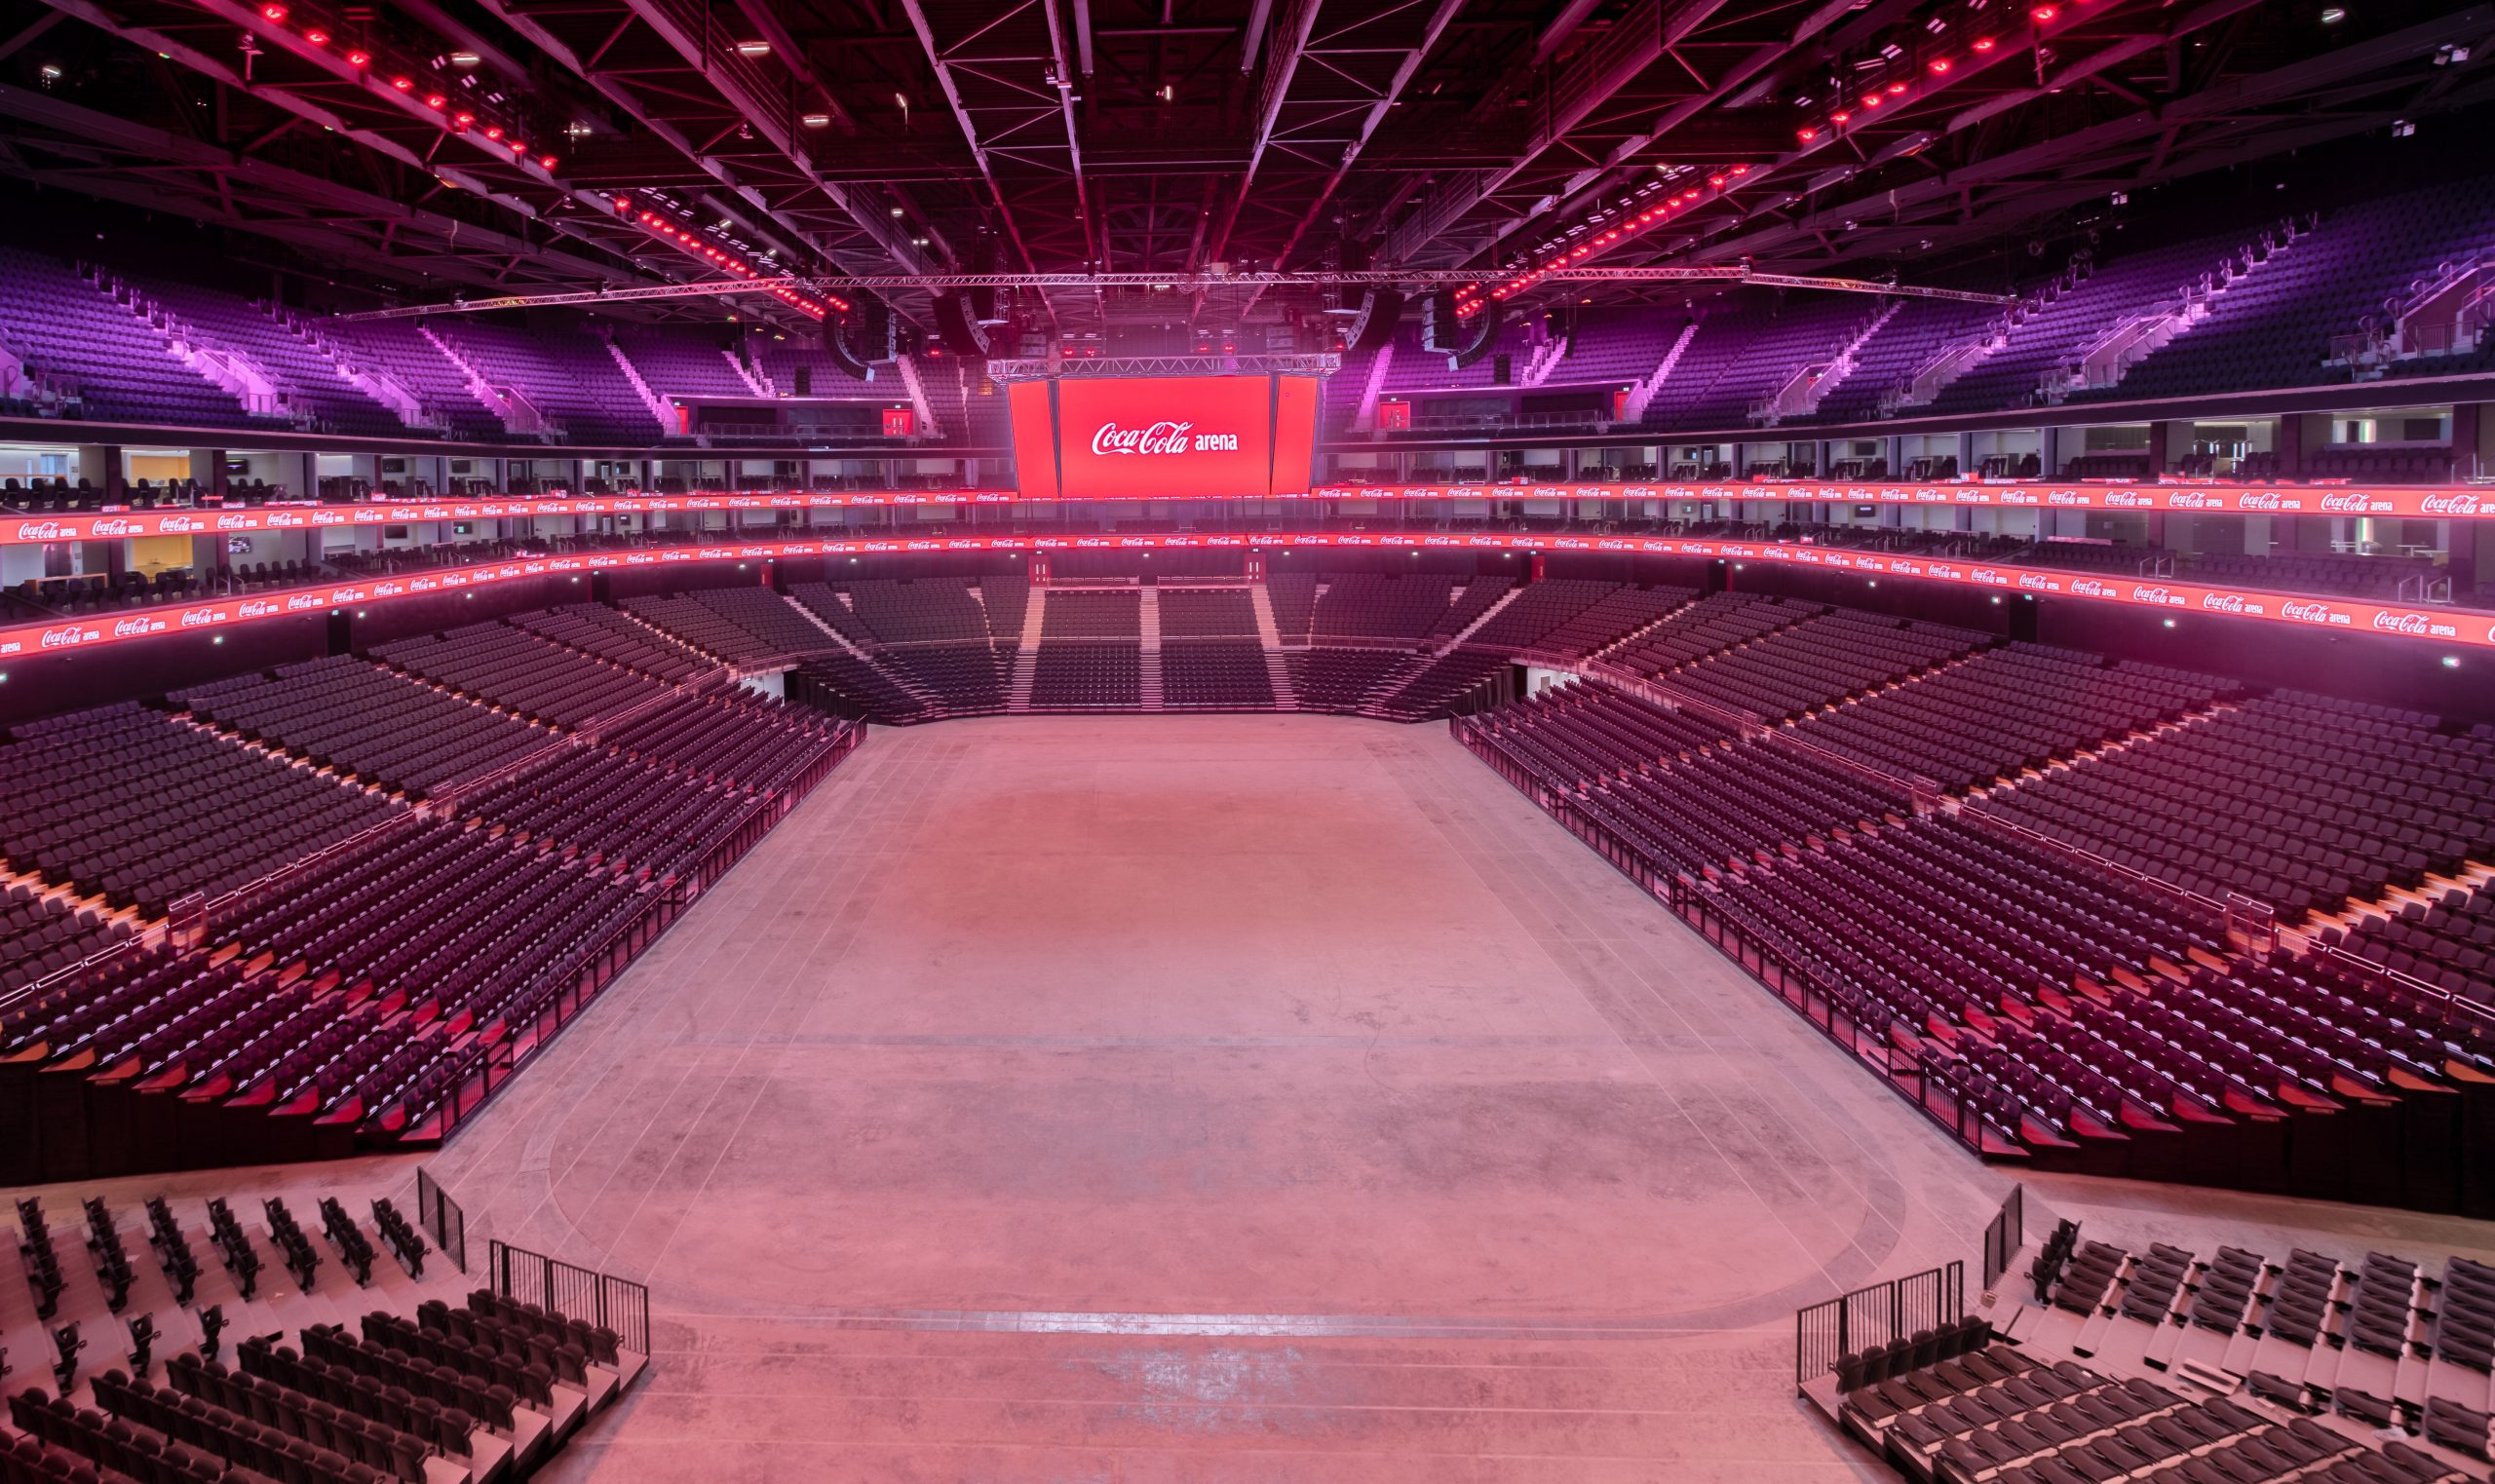 A First Look Inside Dubai's Coca-Cola Arena - GQ Middle East